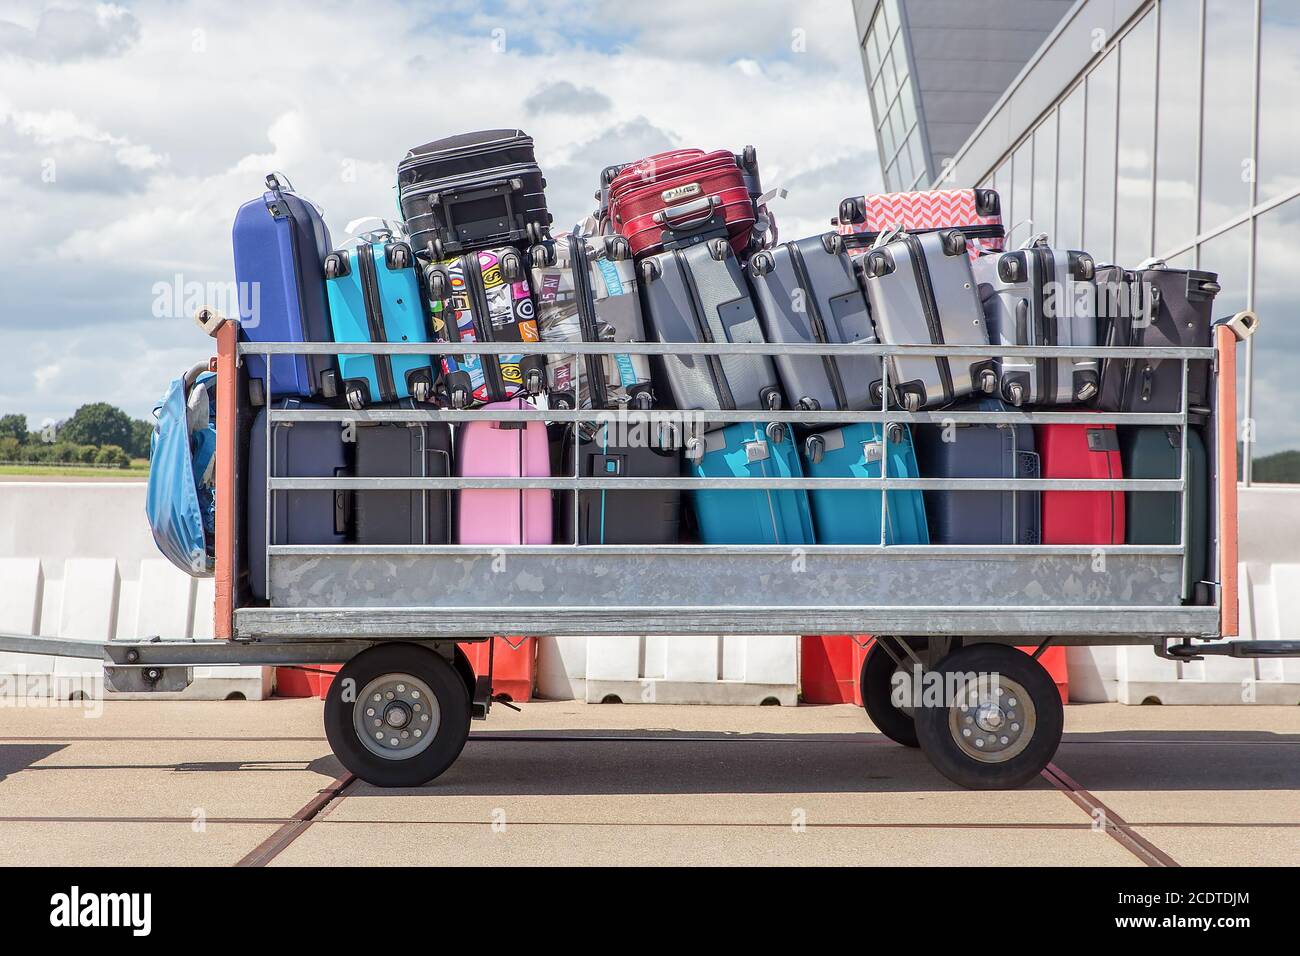 Trailer on airport filled with suitcases Stock Photo